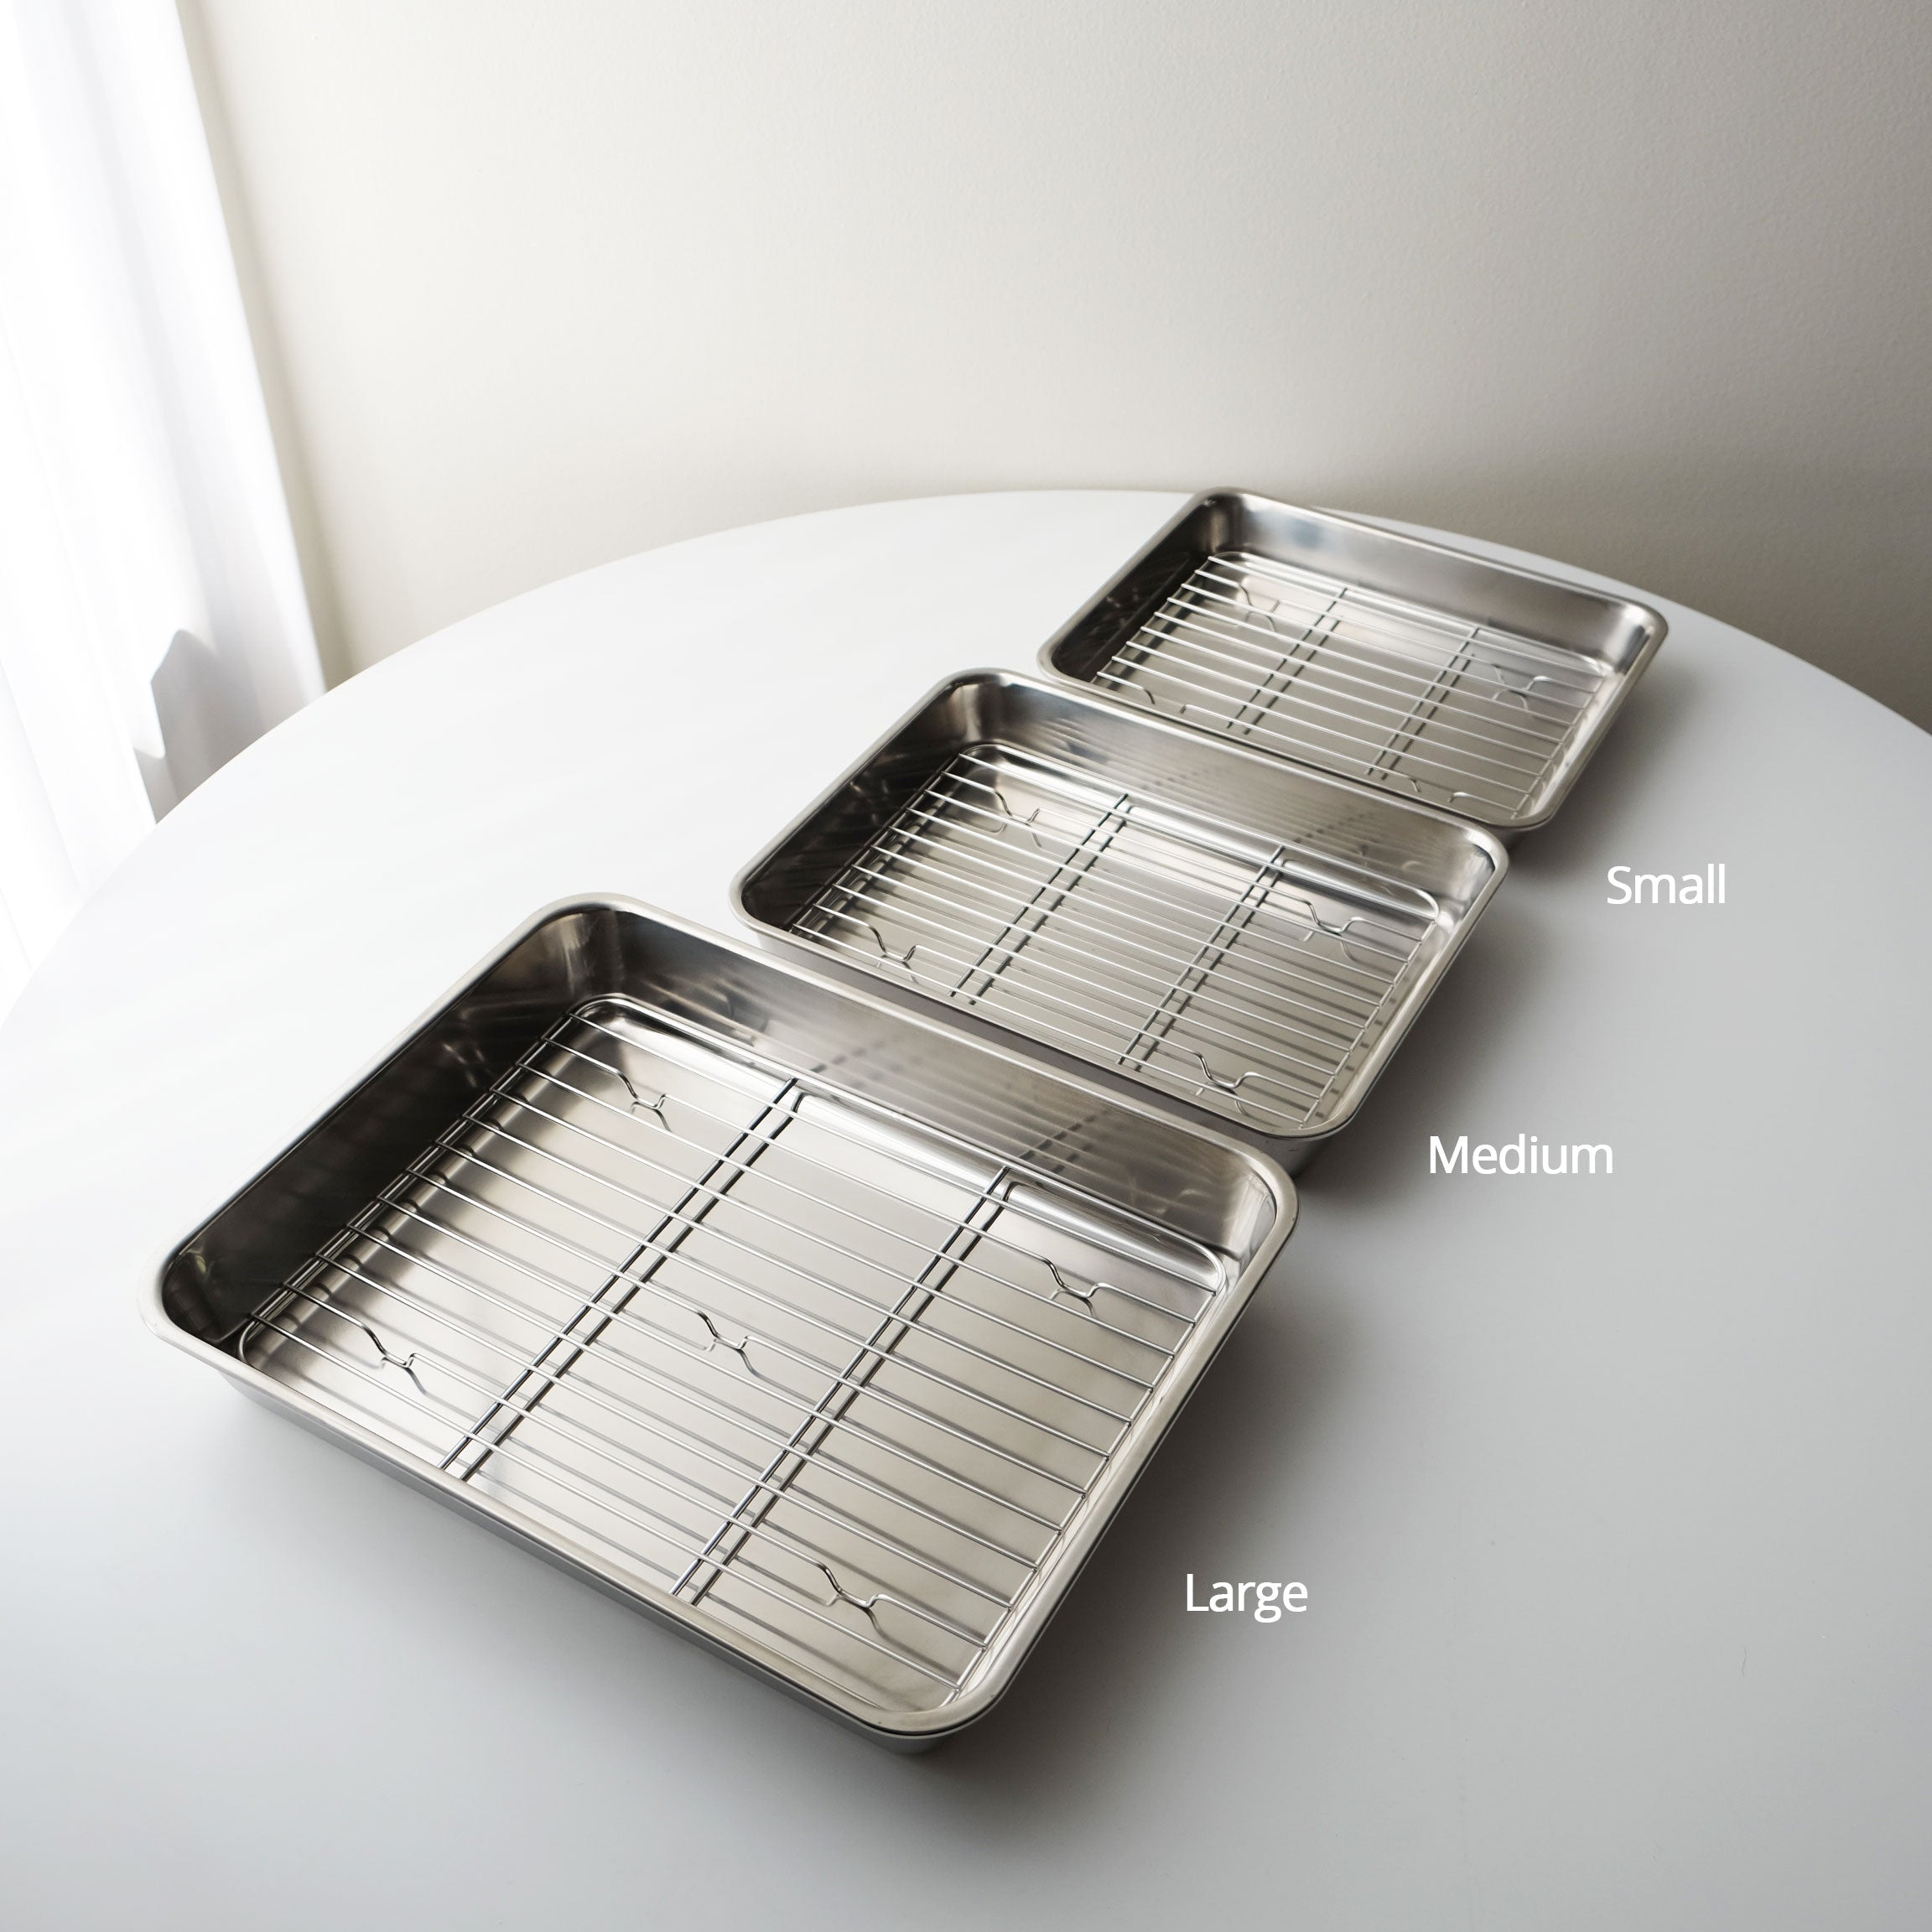 Stainless steel Cooking Tray and Rack Set (3 size)